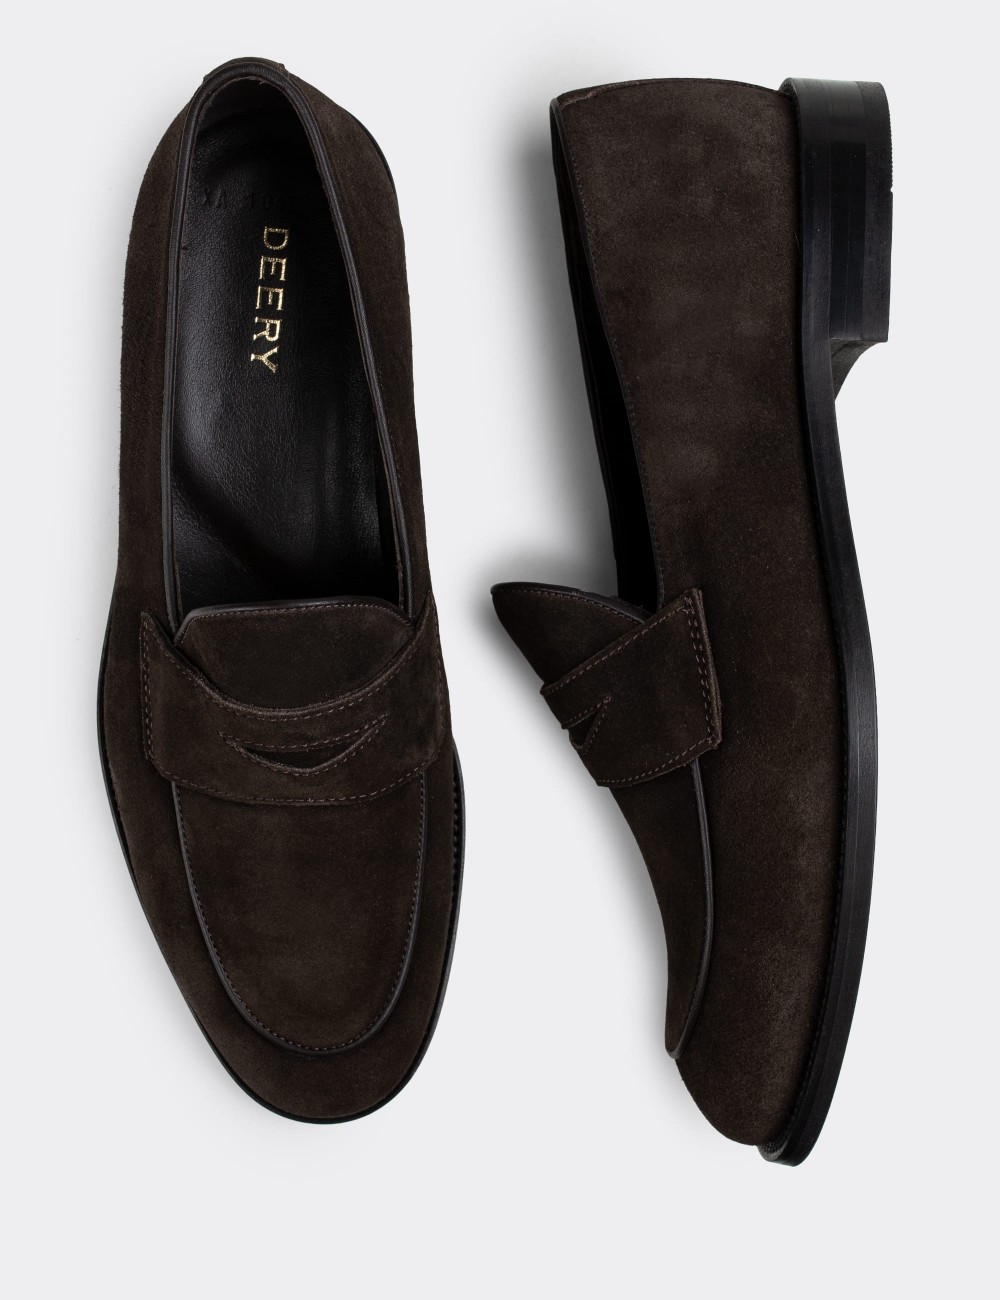 Brown Suede Leather Loafers - 01845MKHVN02